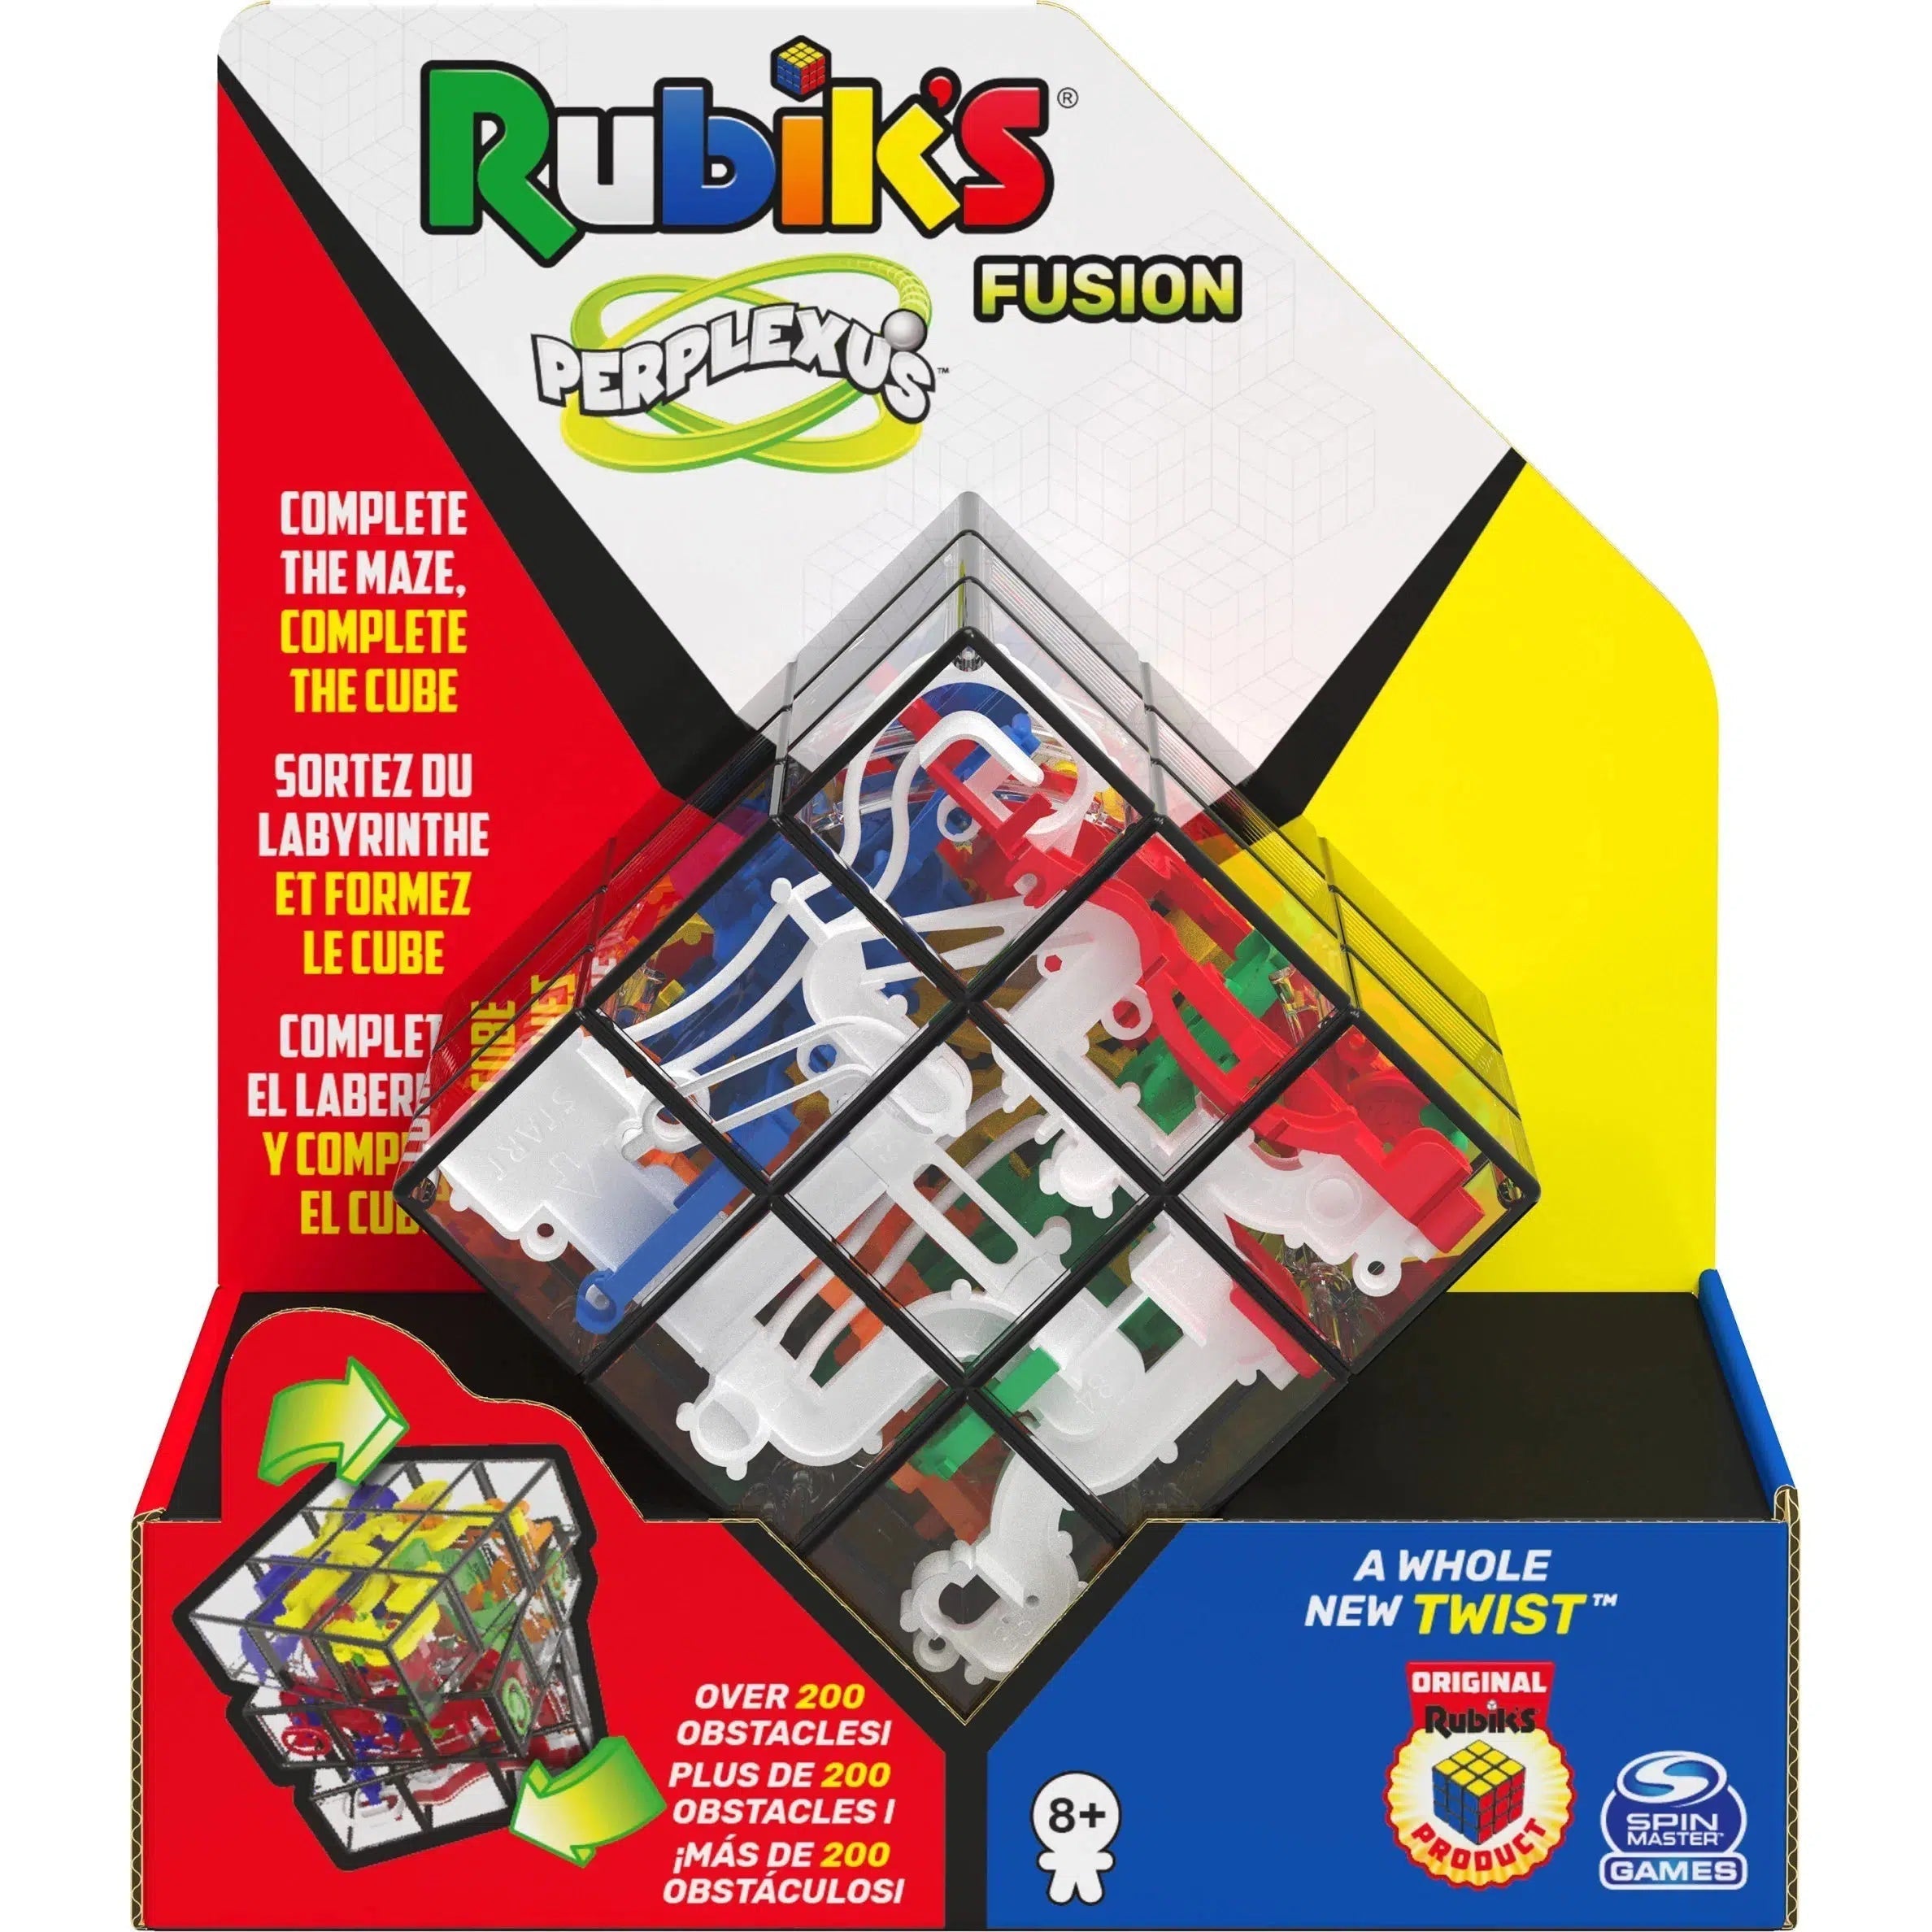 Rubik's x Perplexus Puts a New Spin on Two Classic Puzzles - The Toy Book